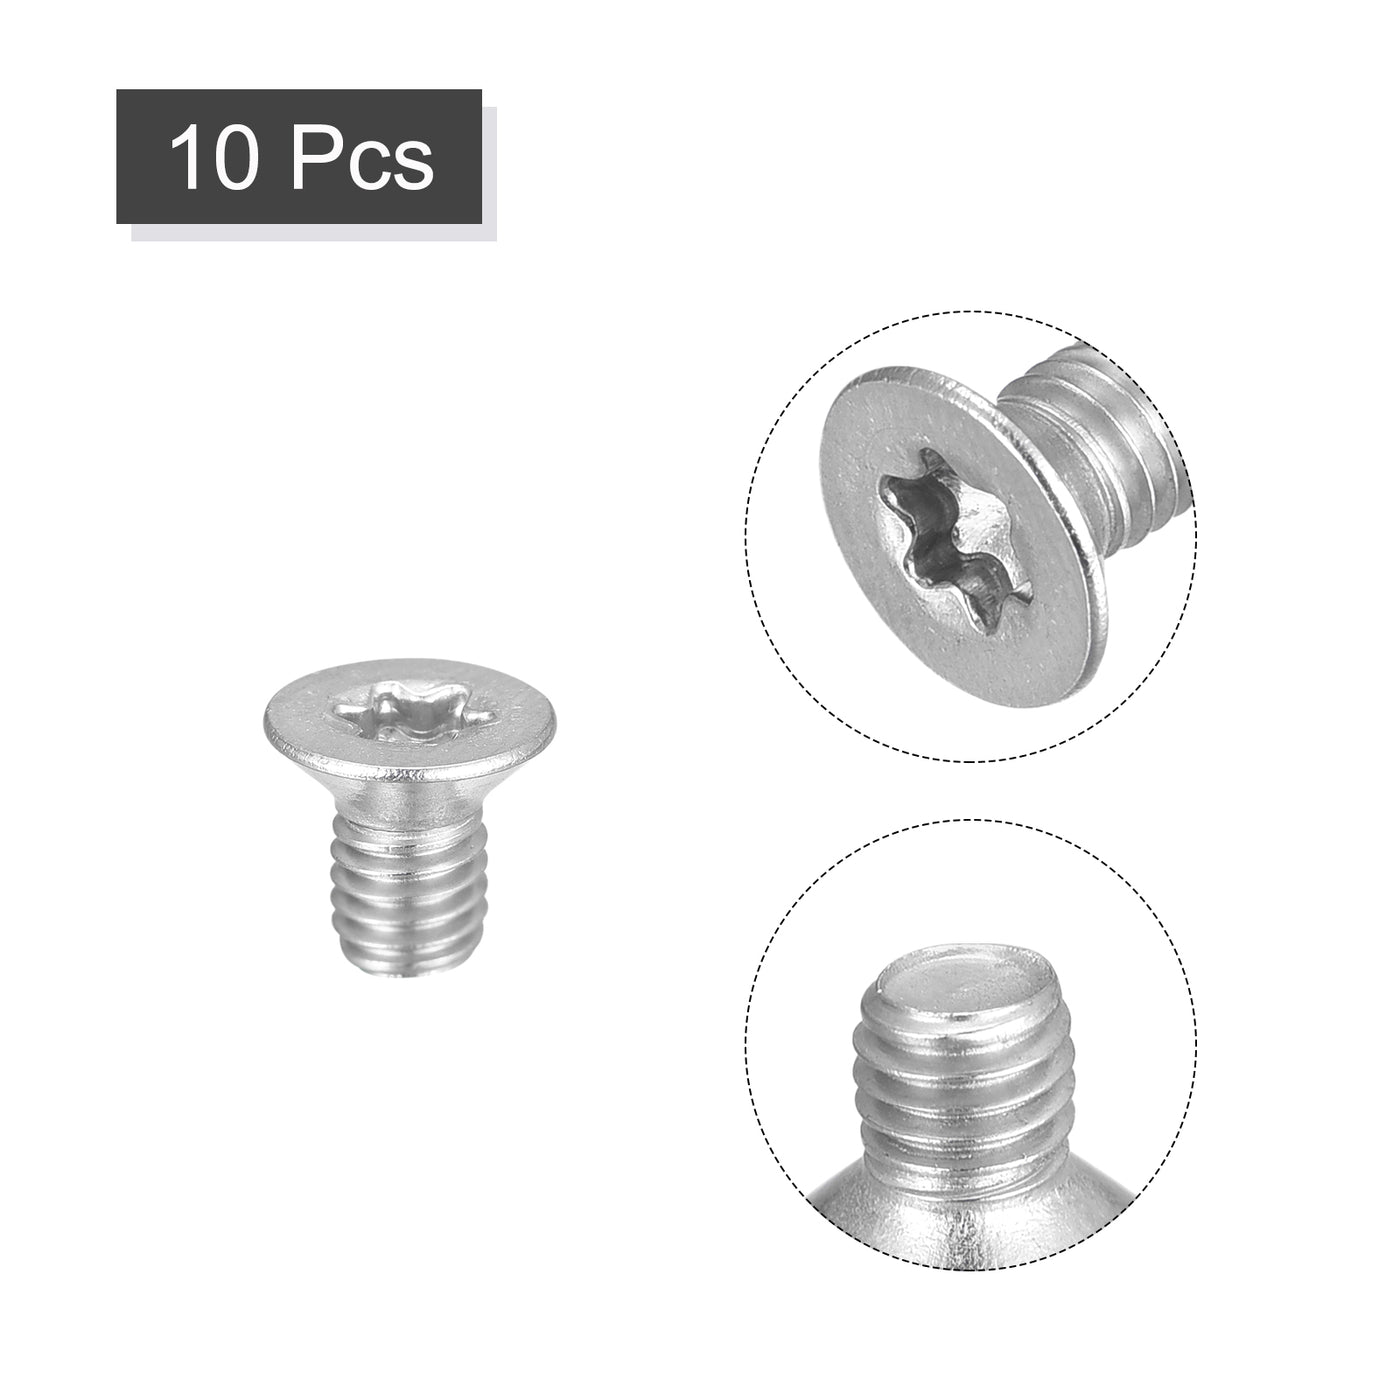 uxcell Uxcell M5x8mm Torx Security Screws, 10pcs 316 Stainless Steel Countersunk Head Screw